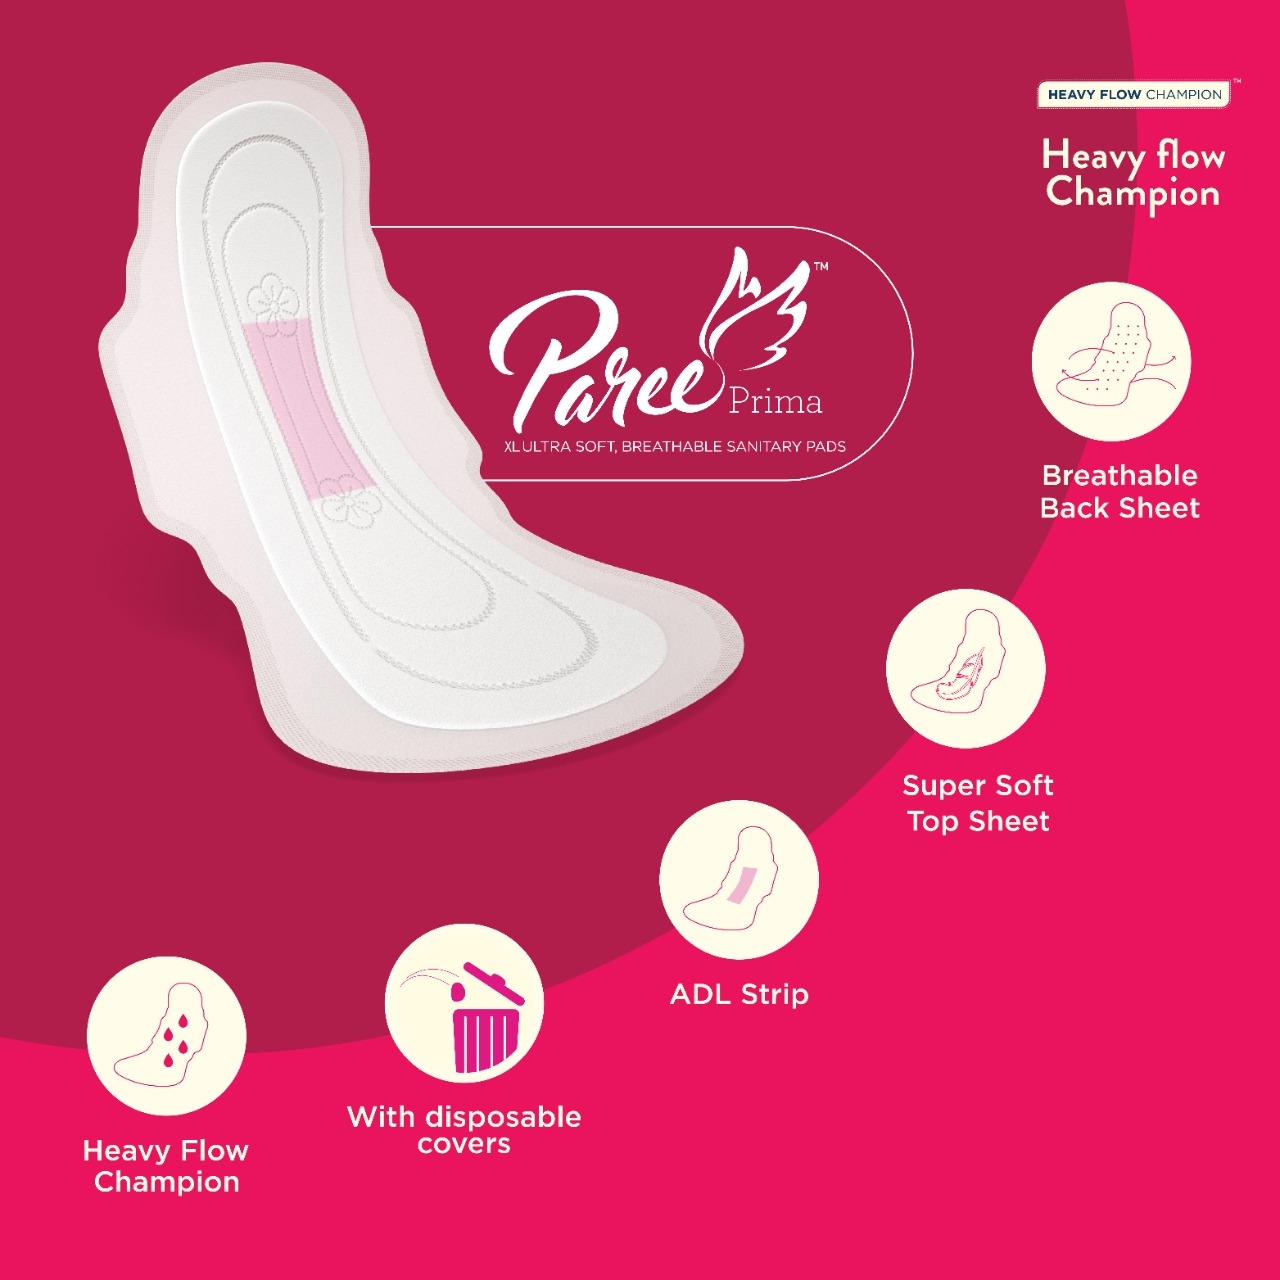 Paree | Paree Prima Premium Ultra Soft Breathable XL Sanitary Pads for Heavy Flow, With Biodegradable Disposable Bags, 20 Pads 2